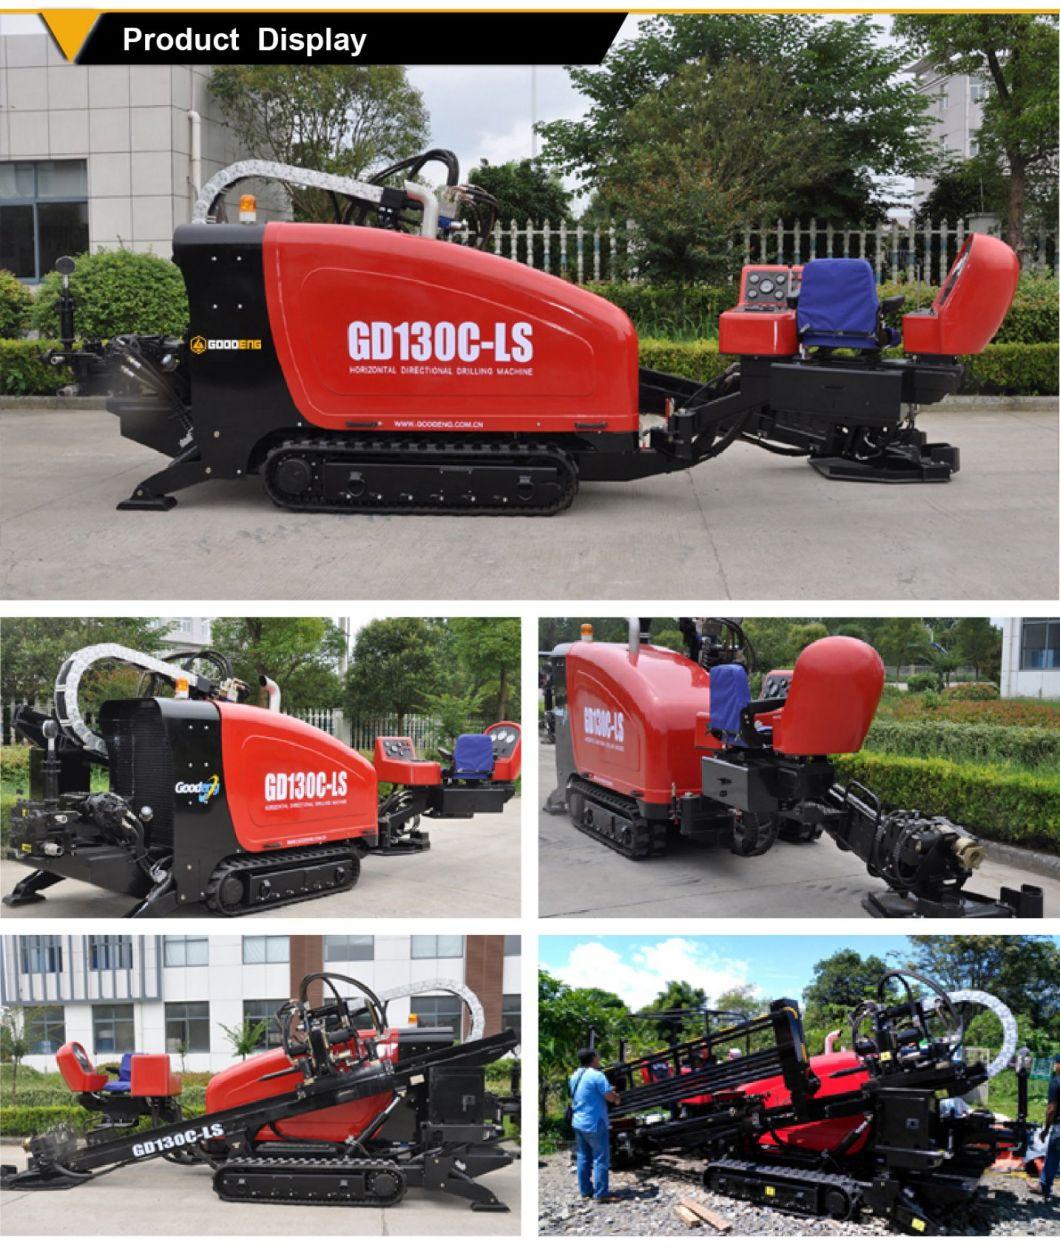 Low Maintenance Cost and Energy saving 13T hdd machine